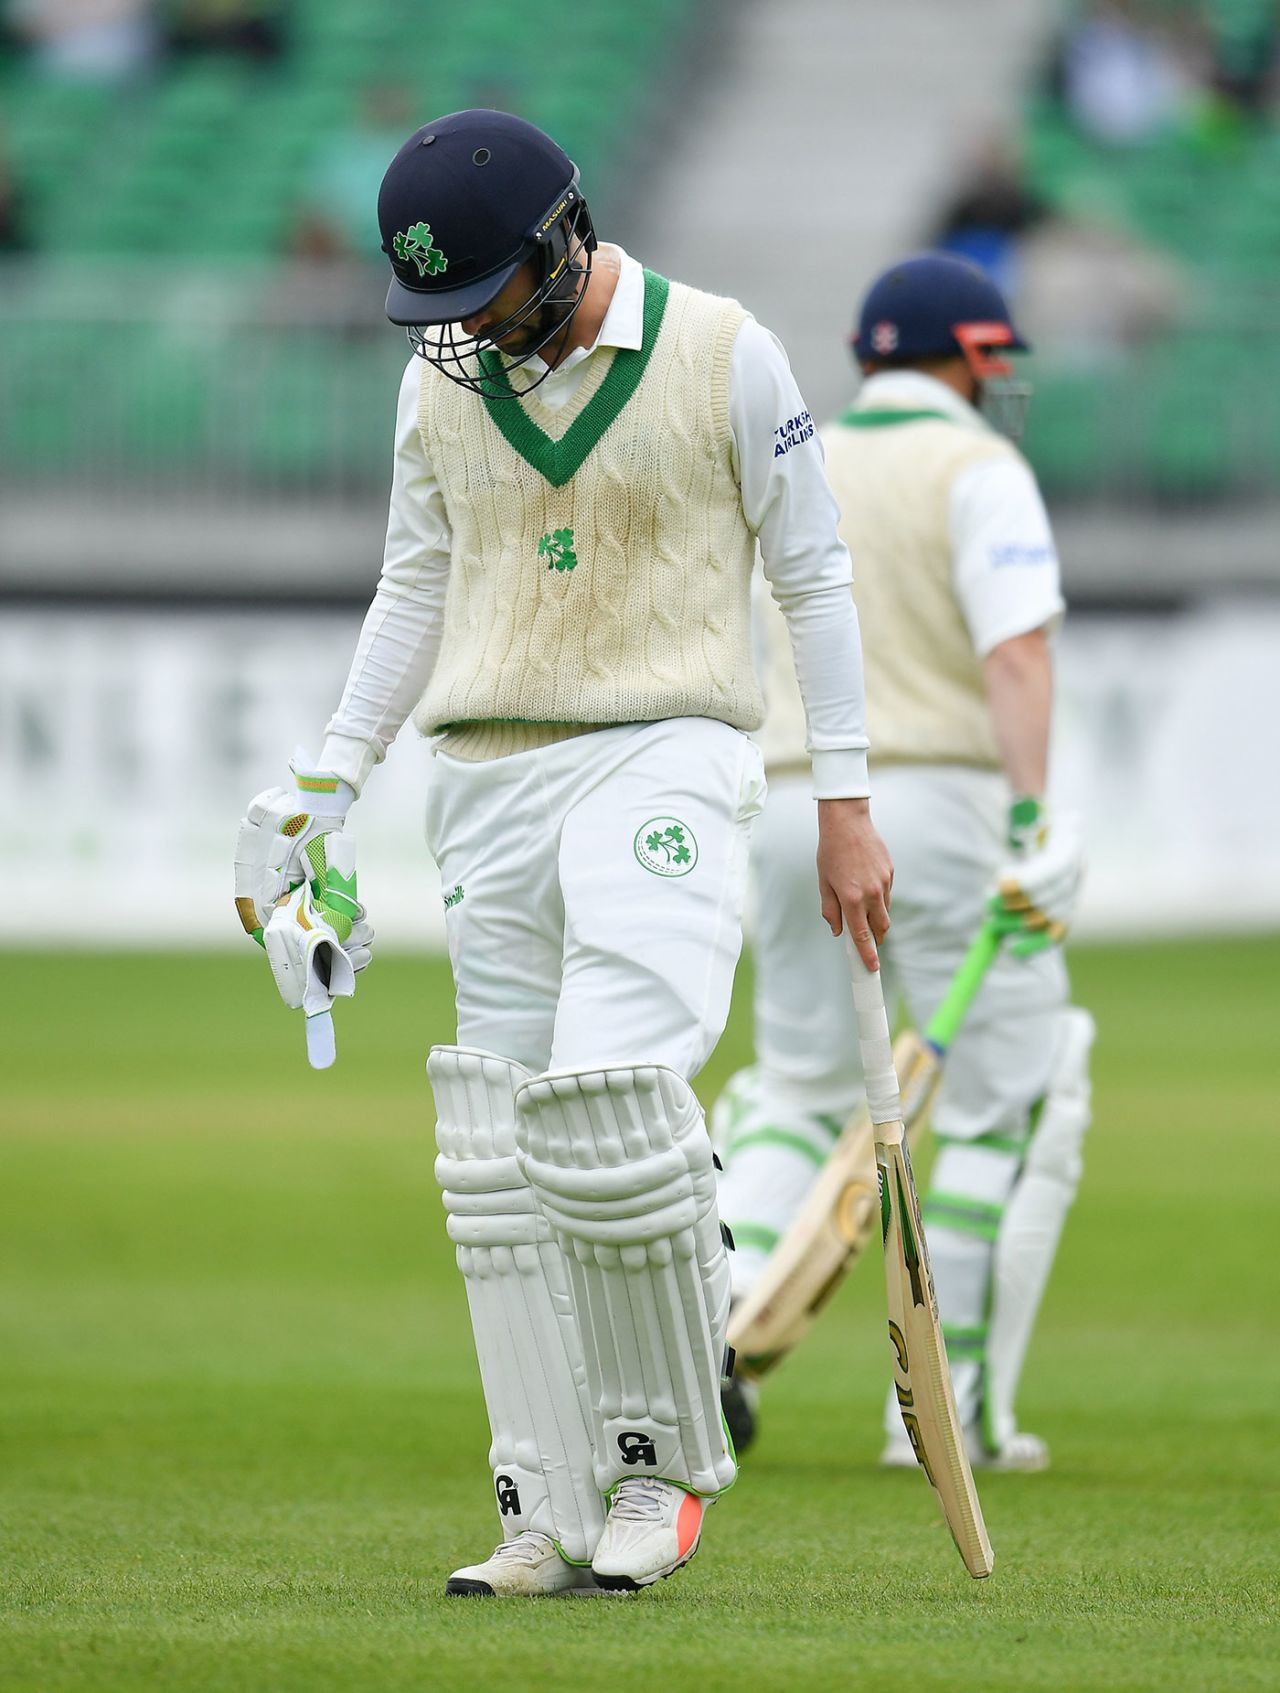 Andy Balbirnie bagged a pair, Ireland v Pakistan, Only Test, Malahide, 4th day, May 14, 2018